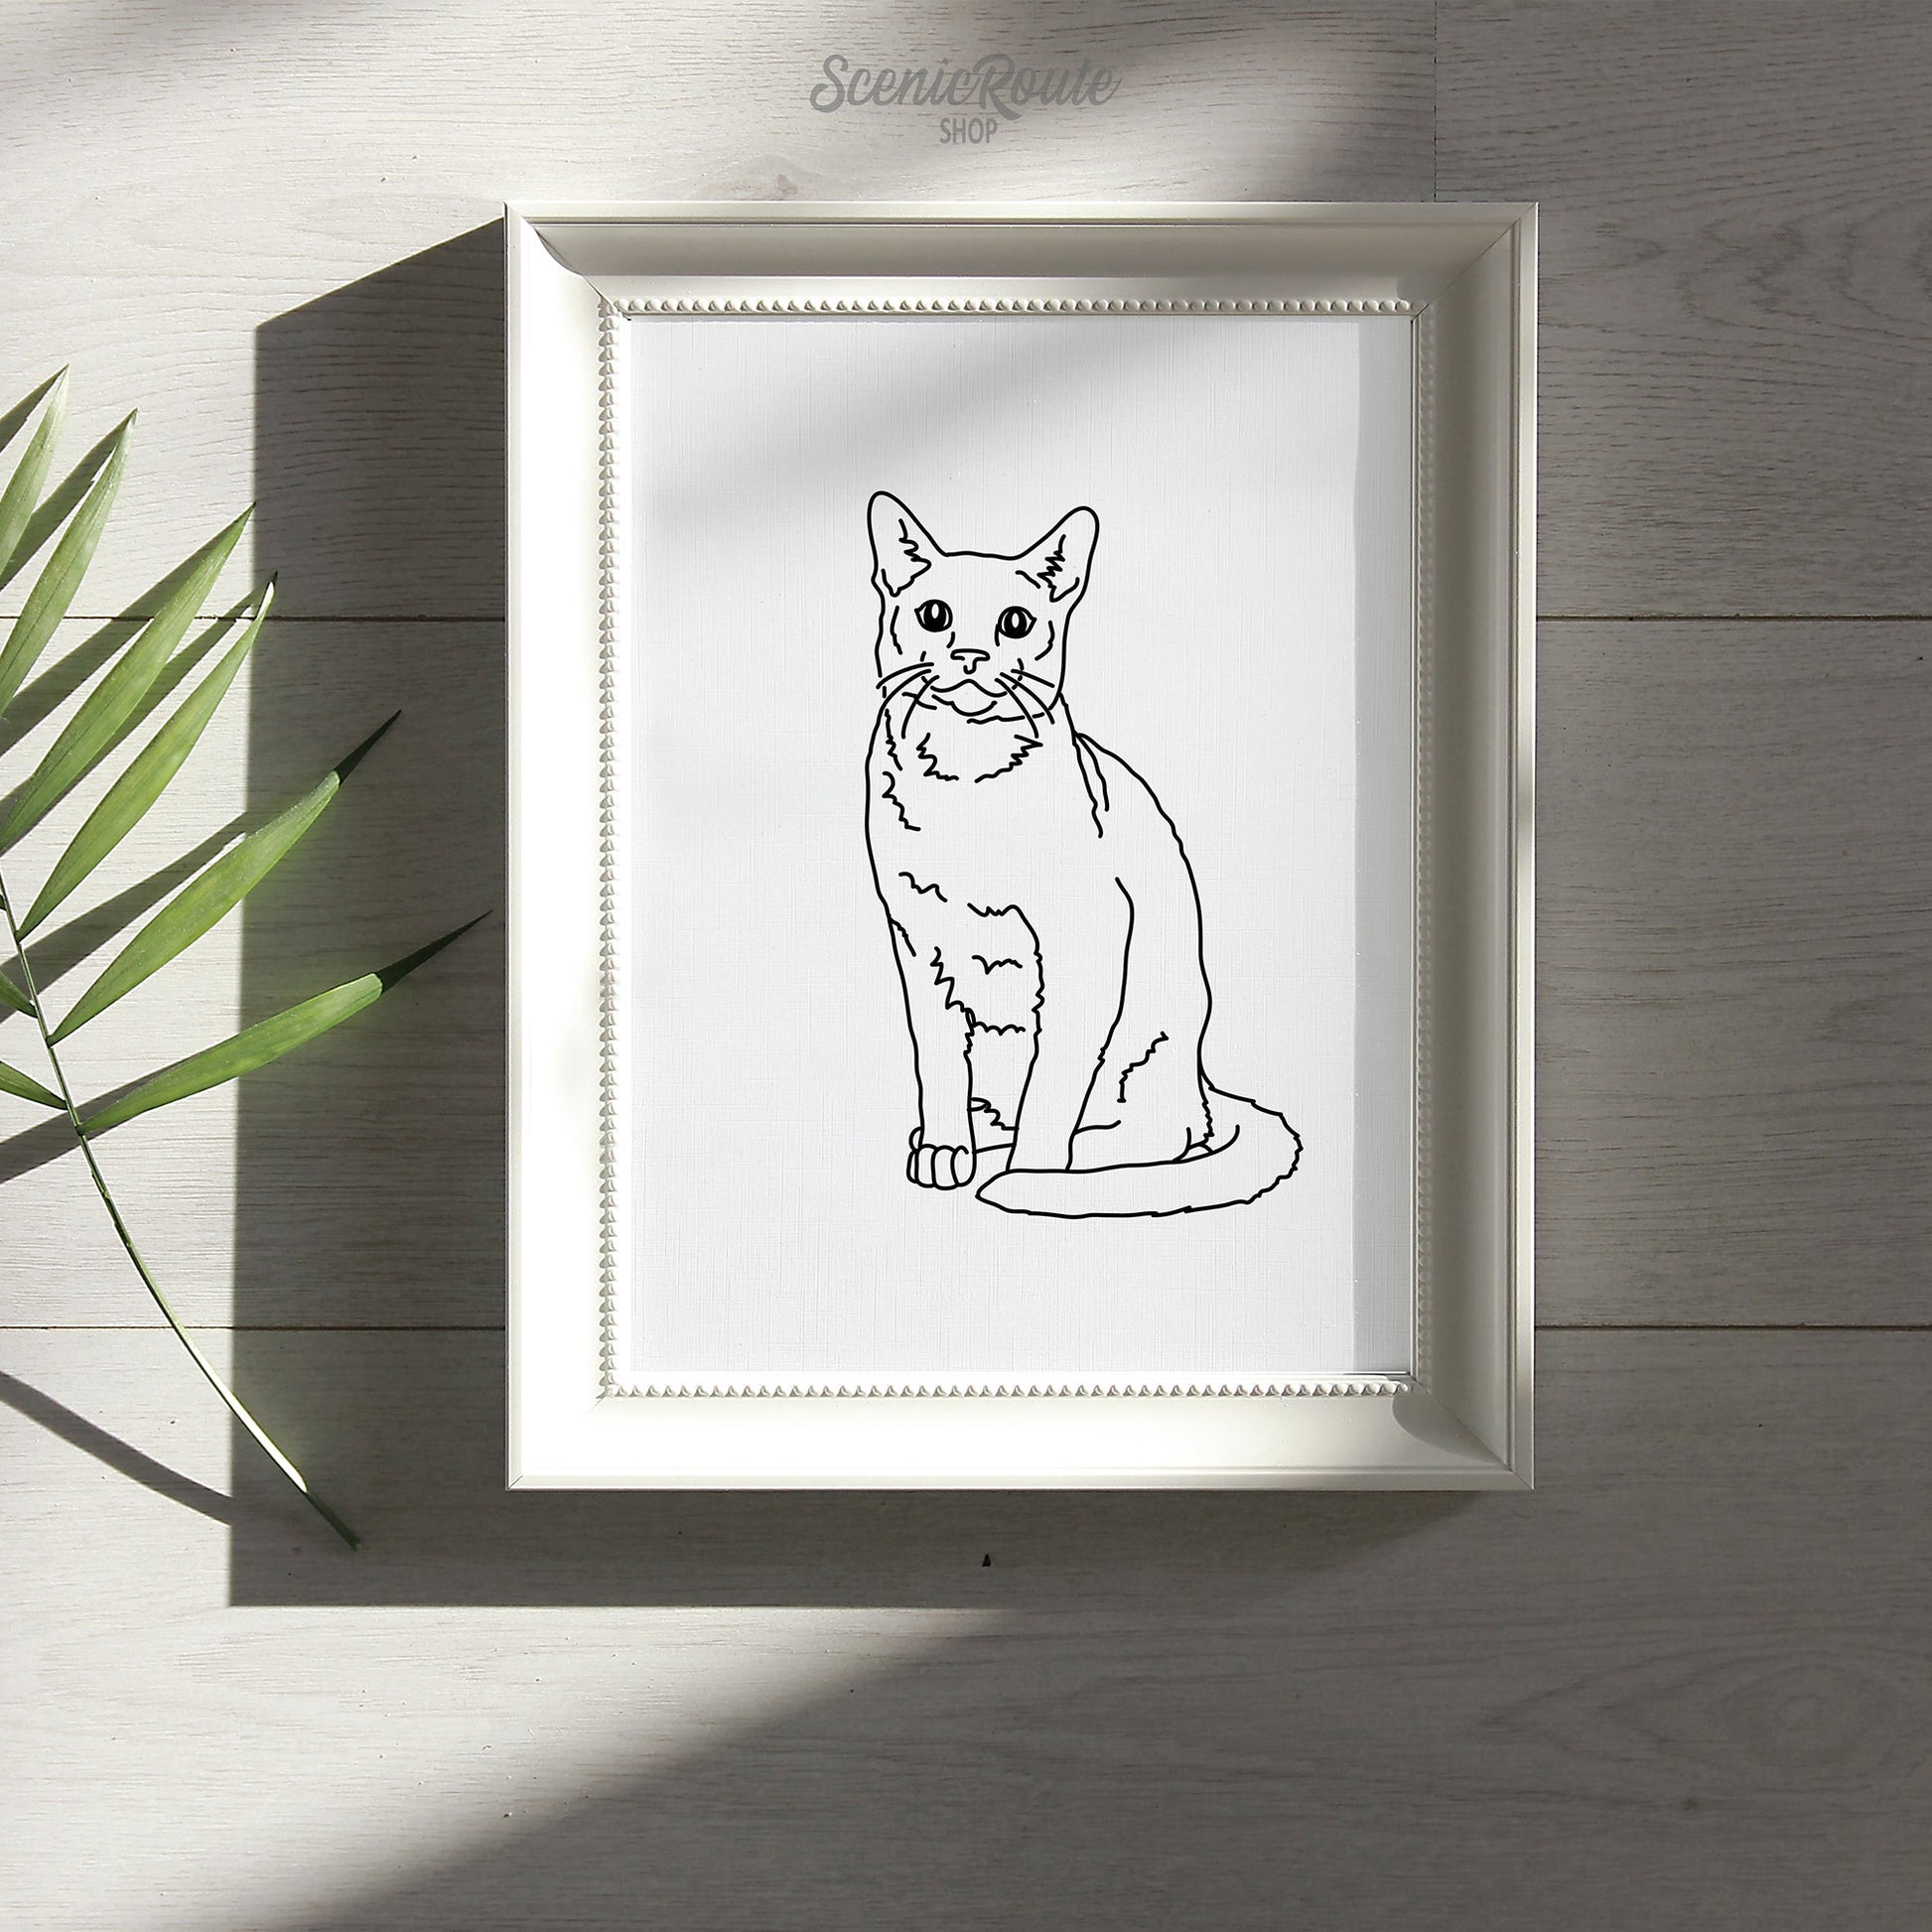 A framed line art drawing of a Russian Blue cat on a wood table with a palm leaf